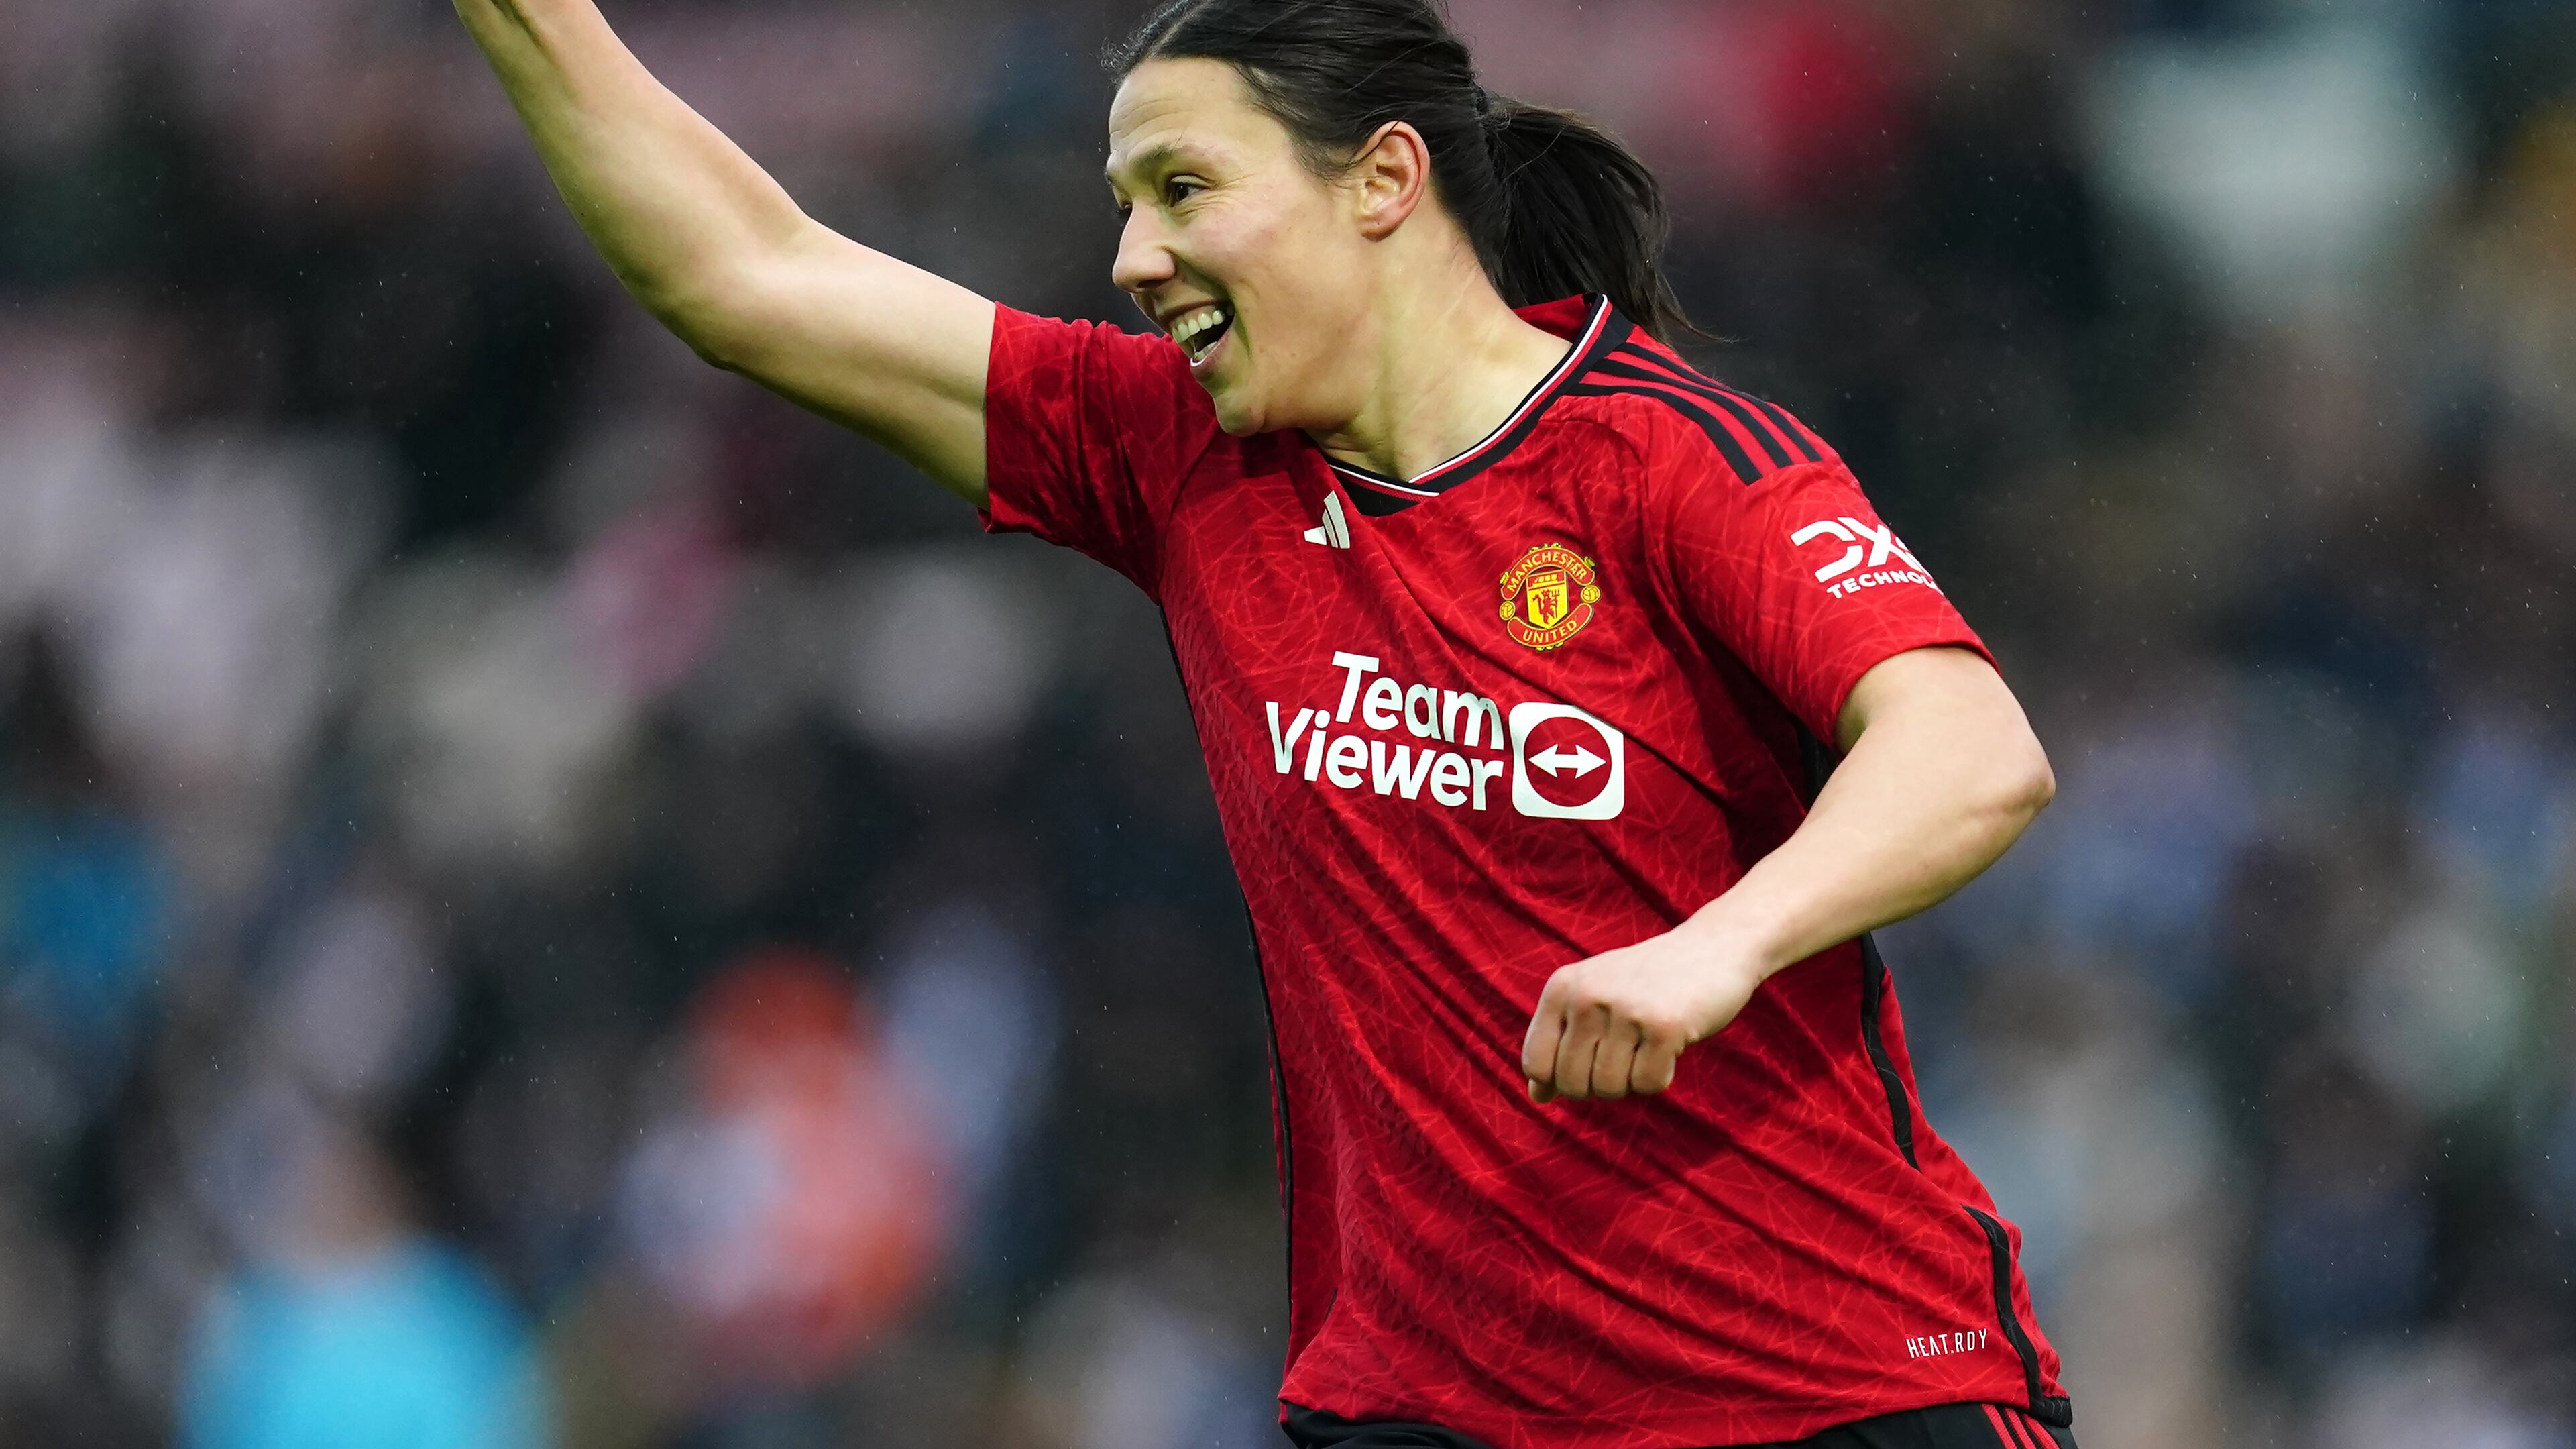 Rachel Williams joined Manchester United from Tottenham in 2022